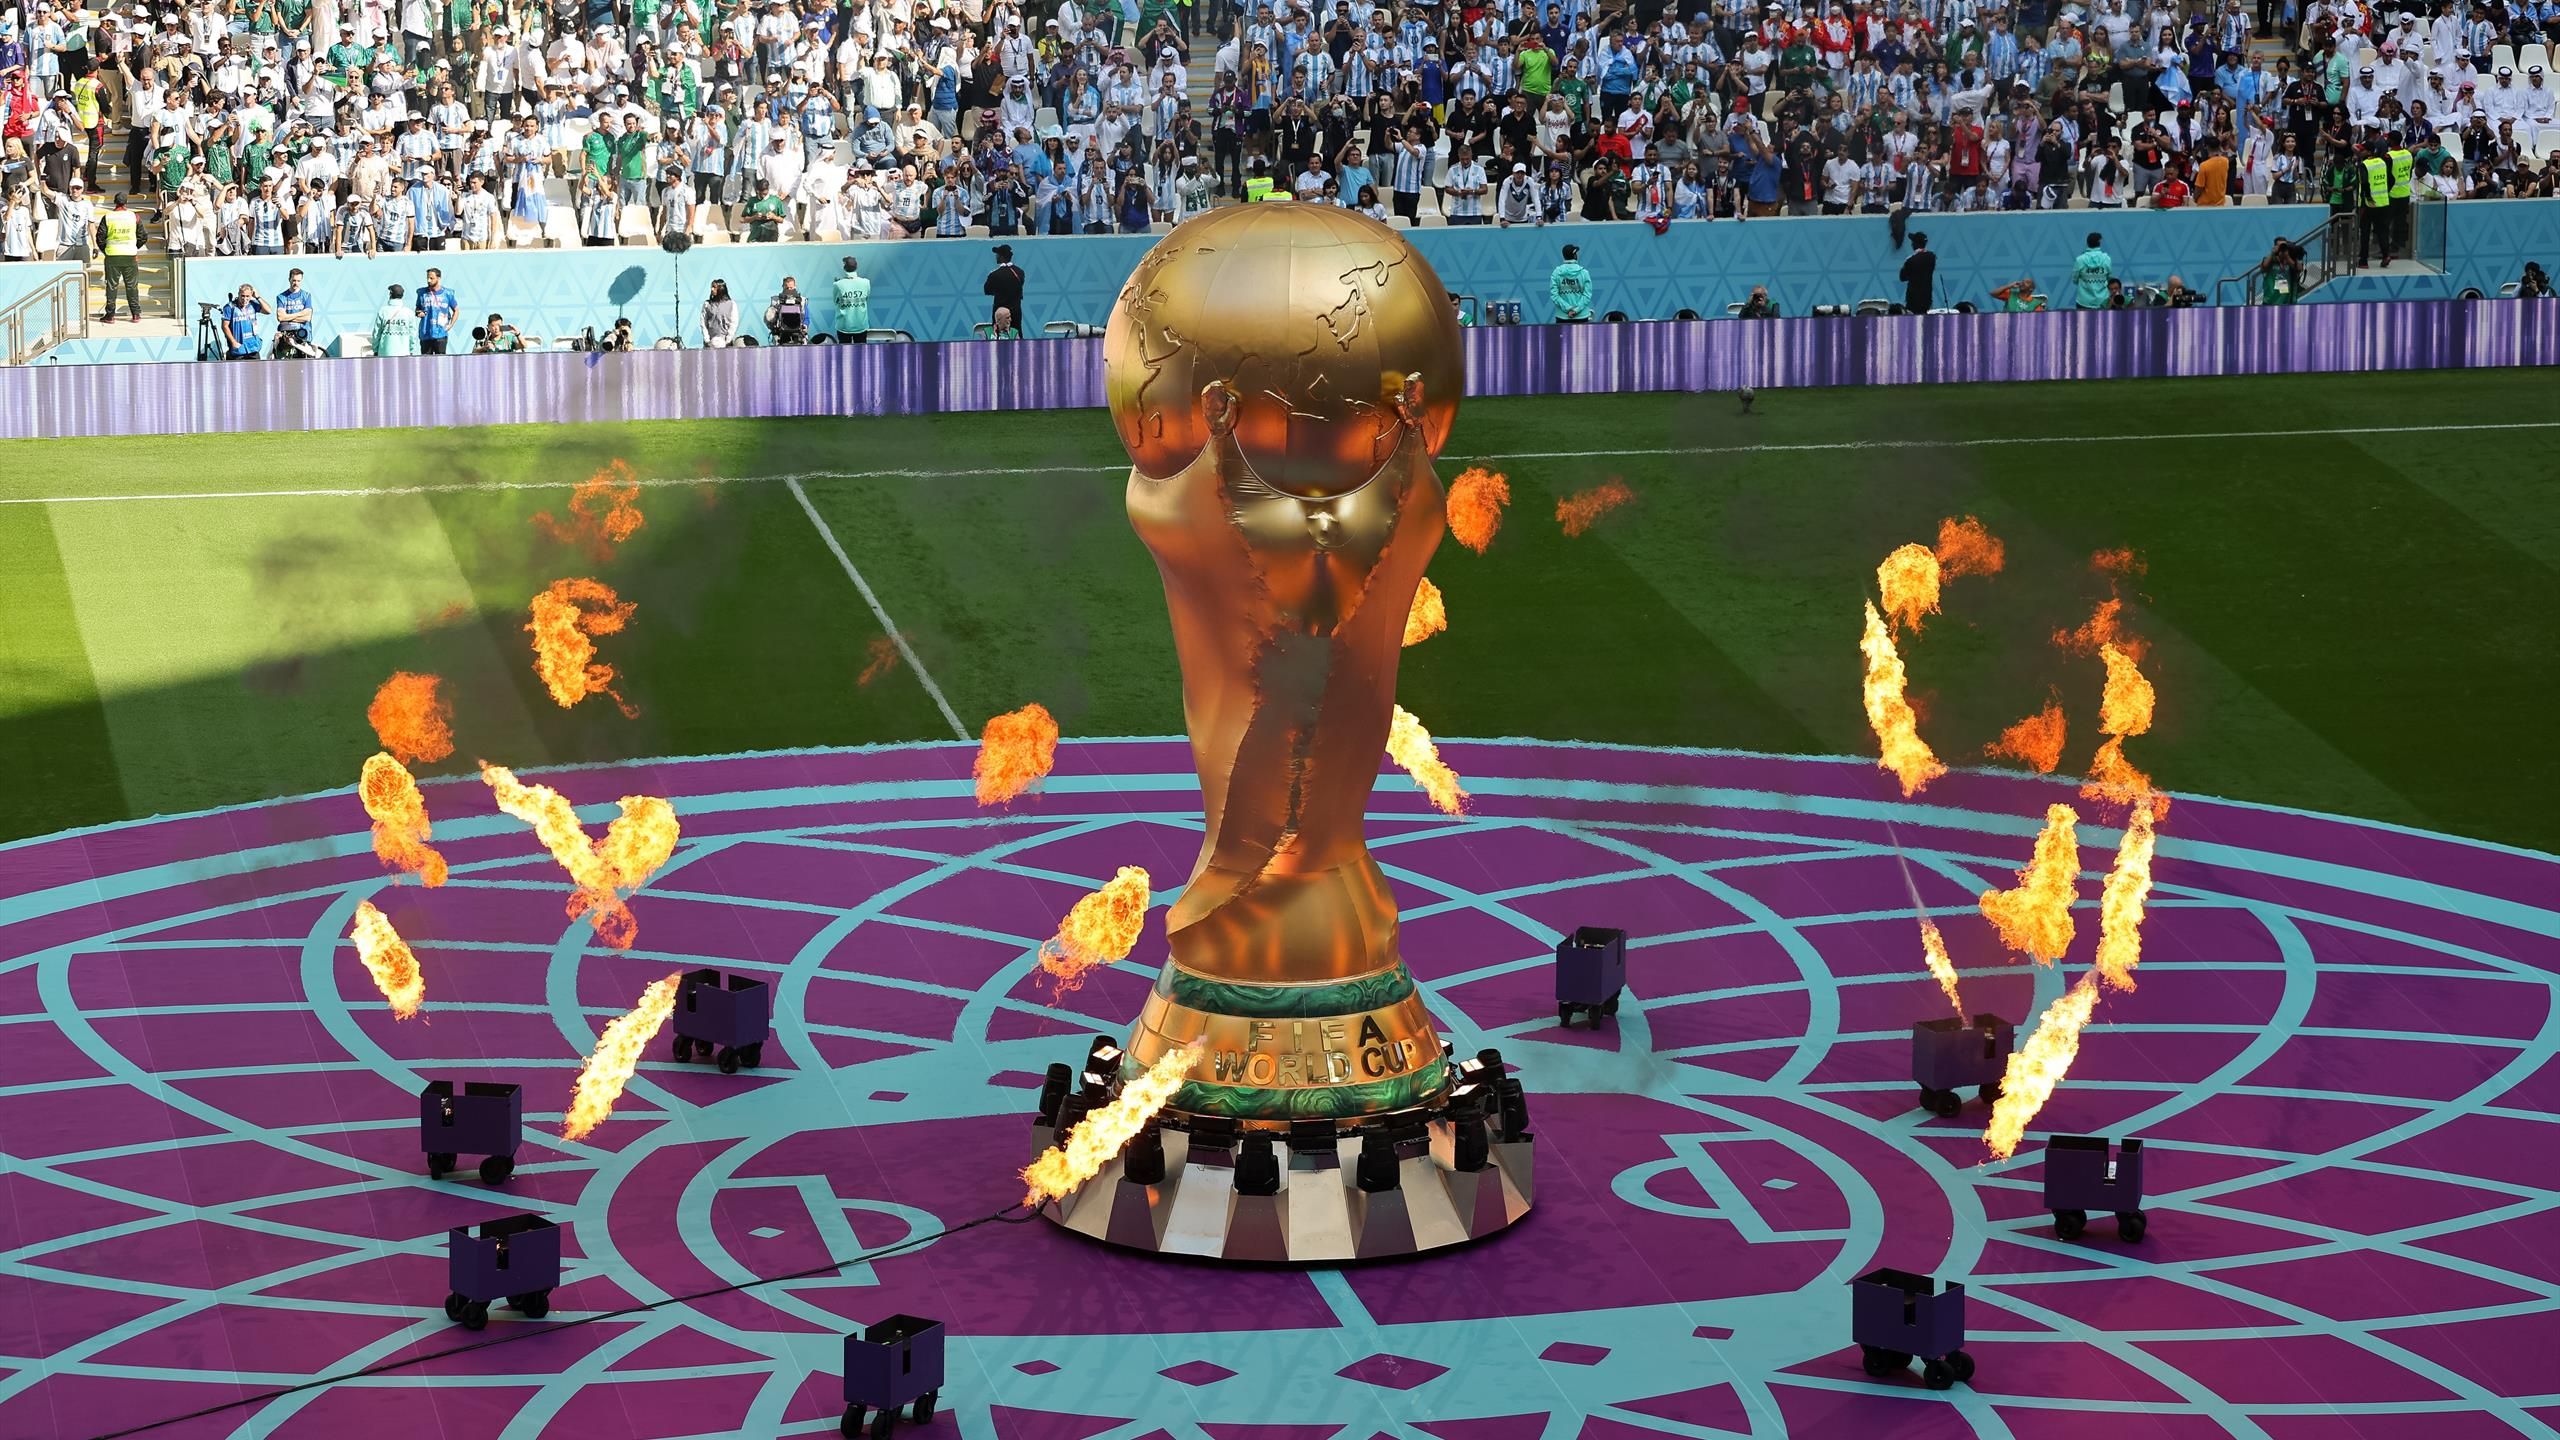 Qatar 2022 World Cup fixtures and schedule - Dates, venues and all you need to know for the tournament